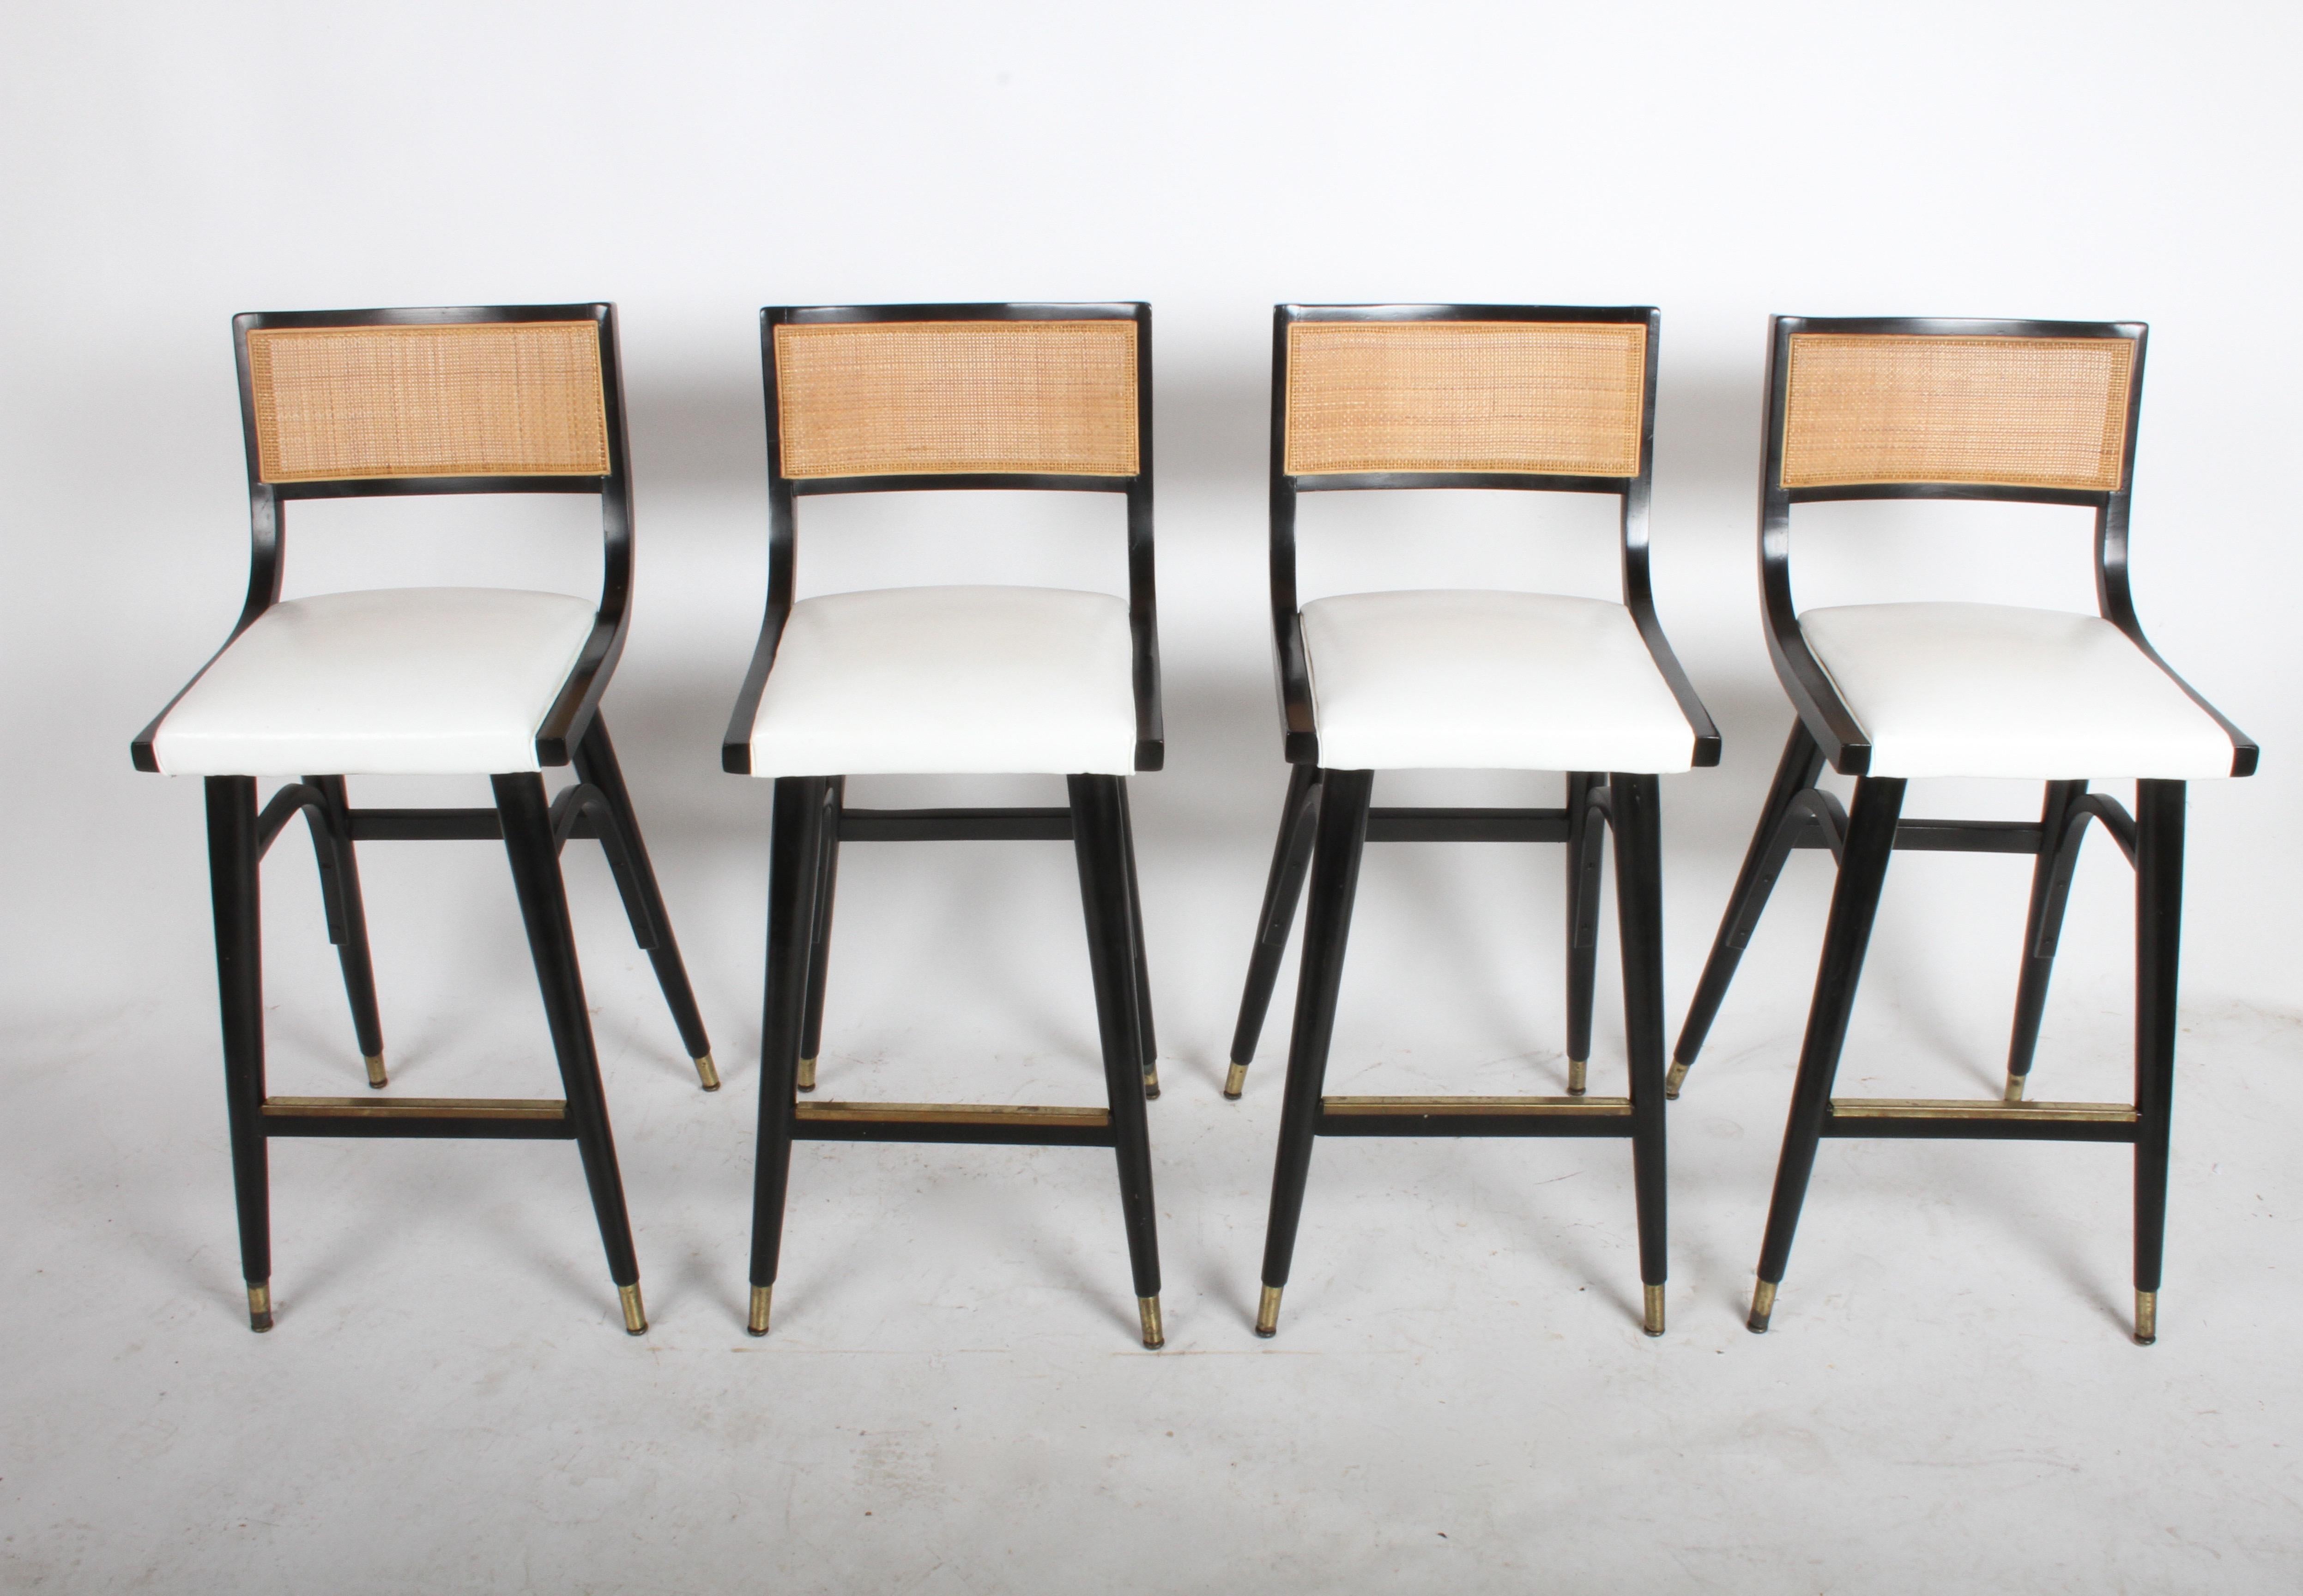 I have four matching bar stools Mid-Century Modern bar stools in the style of Edward Wormley for Dunbar with caned backs, black lacquered frames, brass sabots, white vinyl seats and brass covered footrest. All original condition, overall very nice,